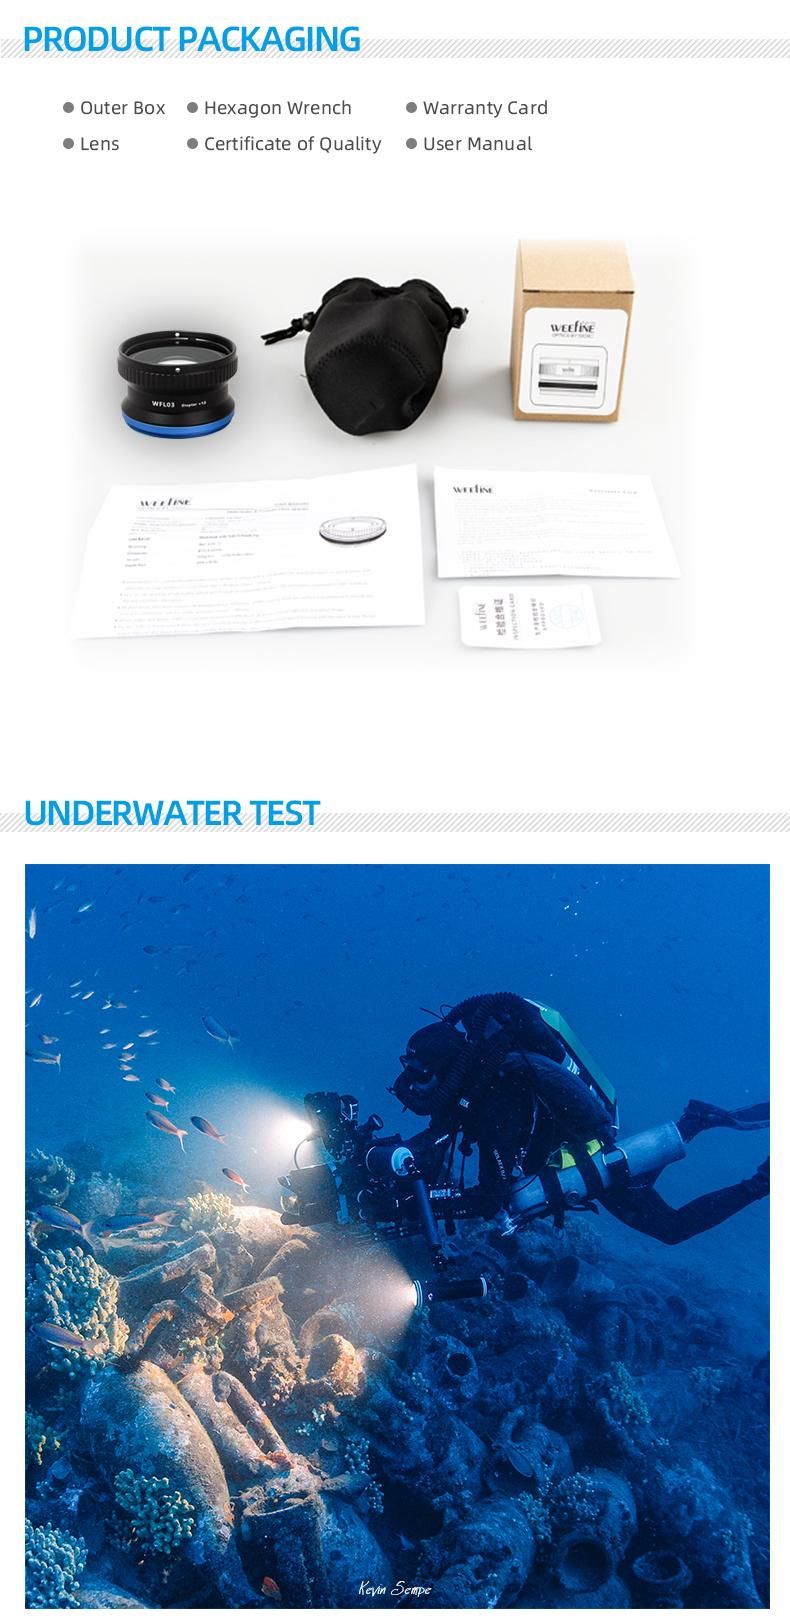 Premium 40 Microns Close-up Lens for Underwater Photographing with Anti Scratch and Anti-Glare